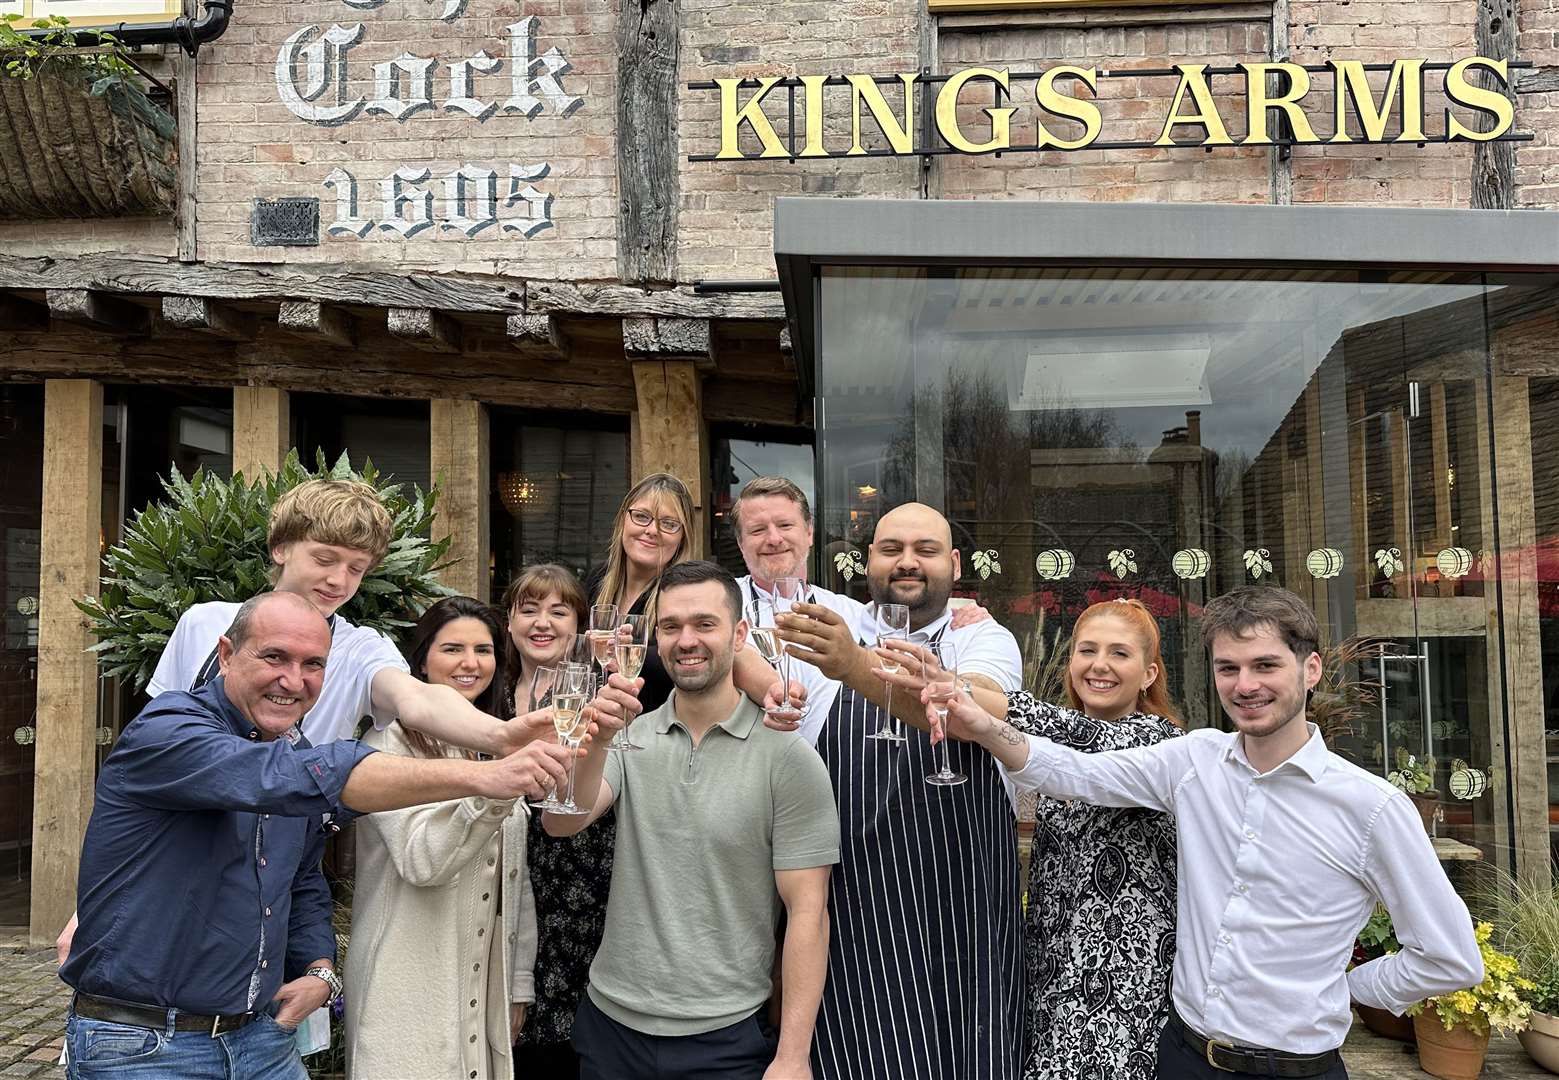 Just six months after opening, the King's Arms pub in Elham has been recognised as the best pub in Kent at Pub & Bar magazine's annual awards. Picture: Maxim PR/Contemporary Pubs